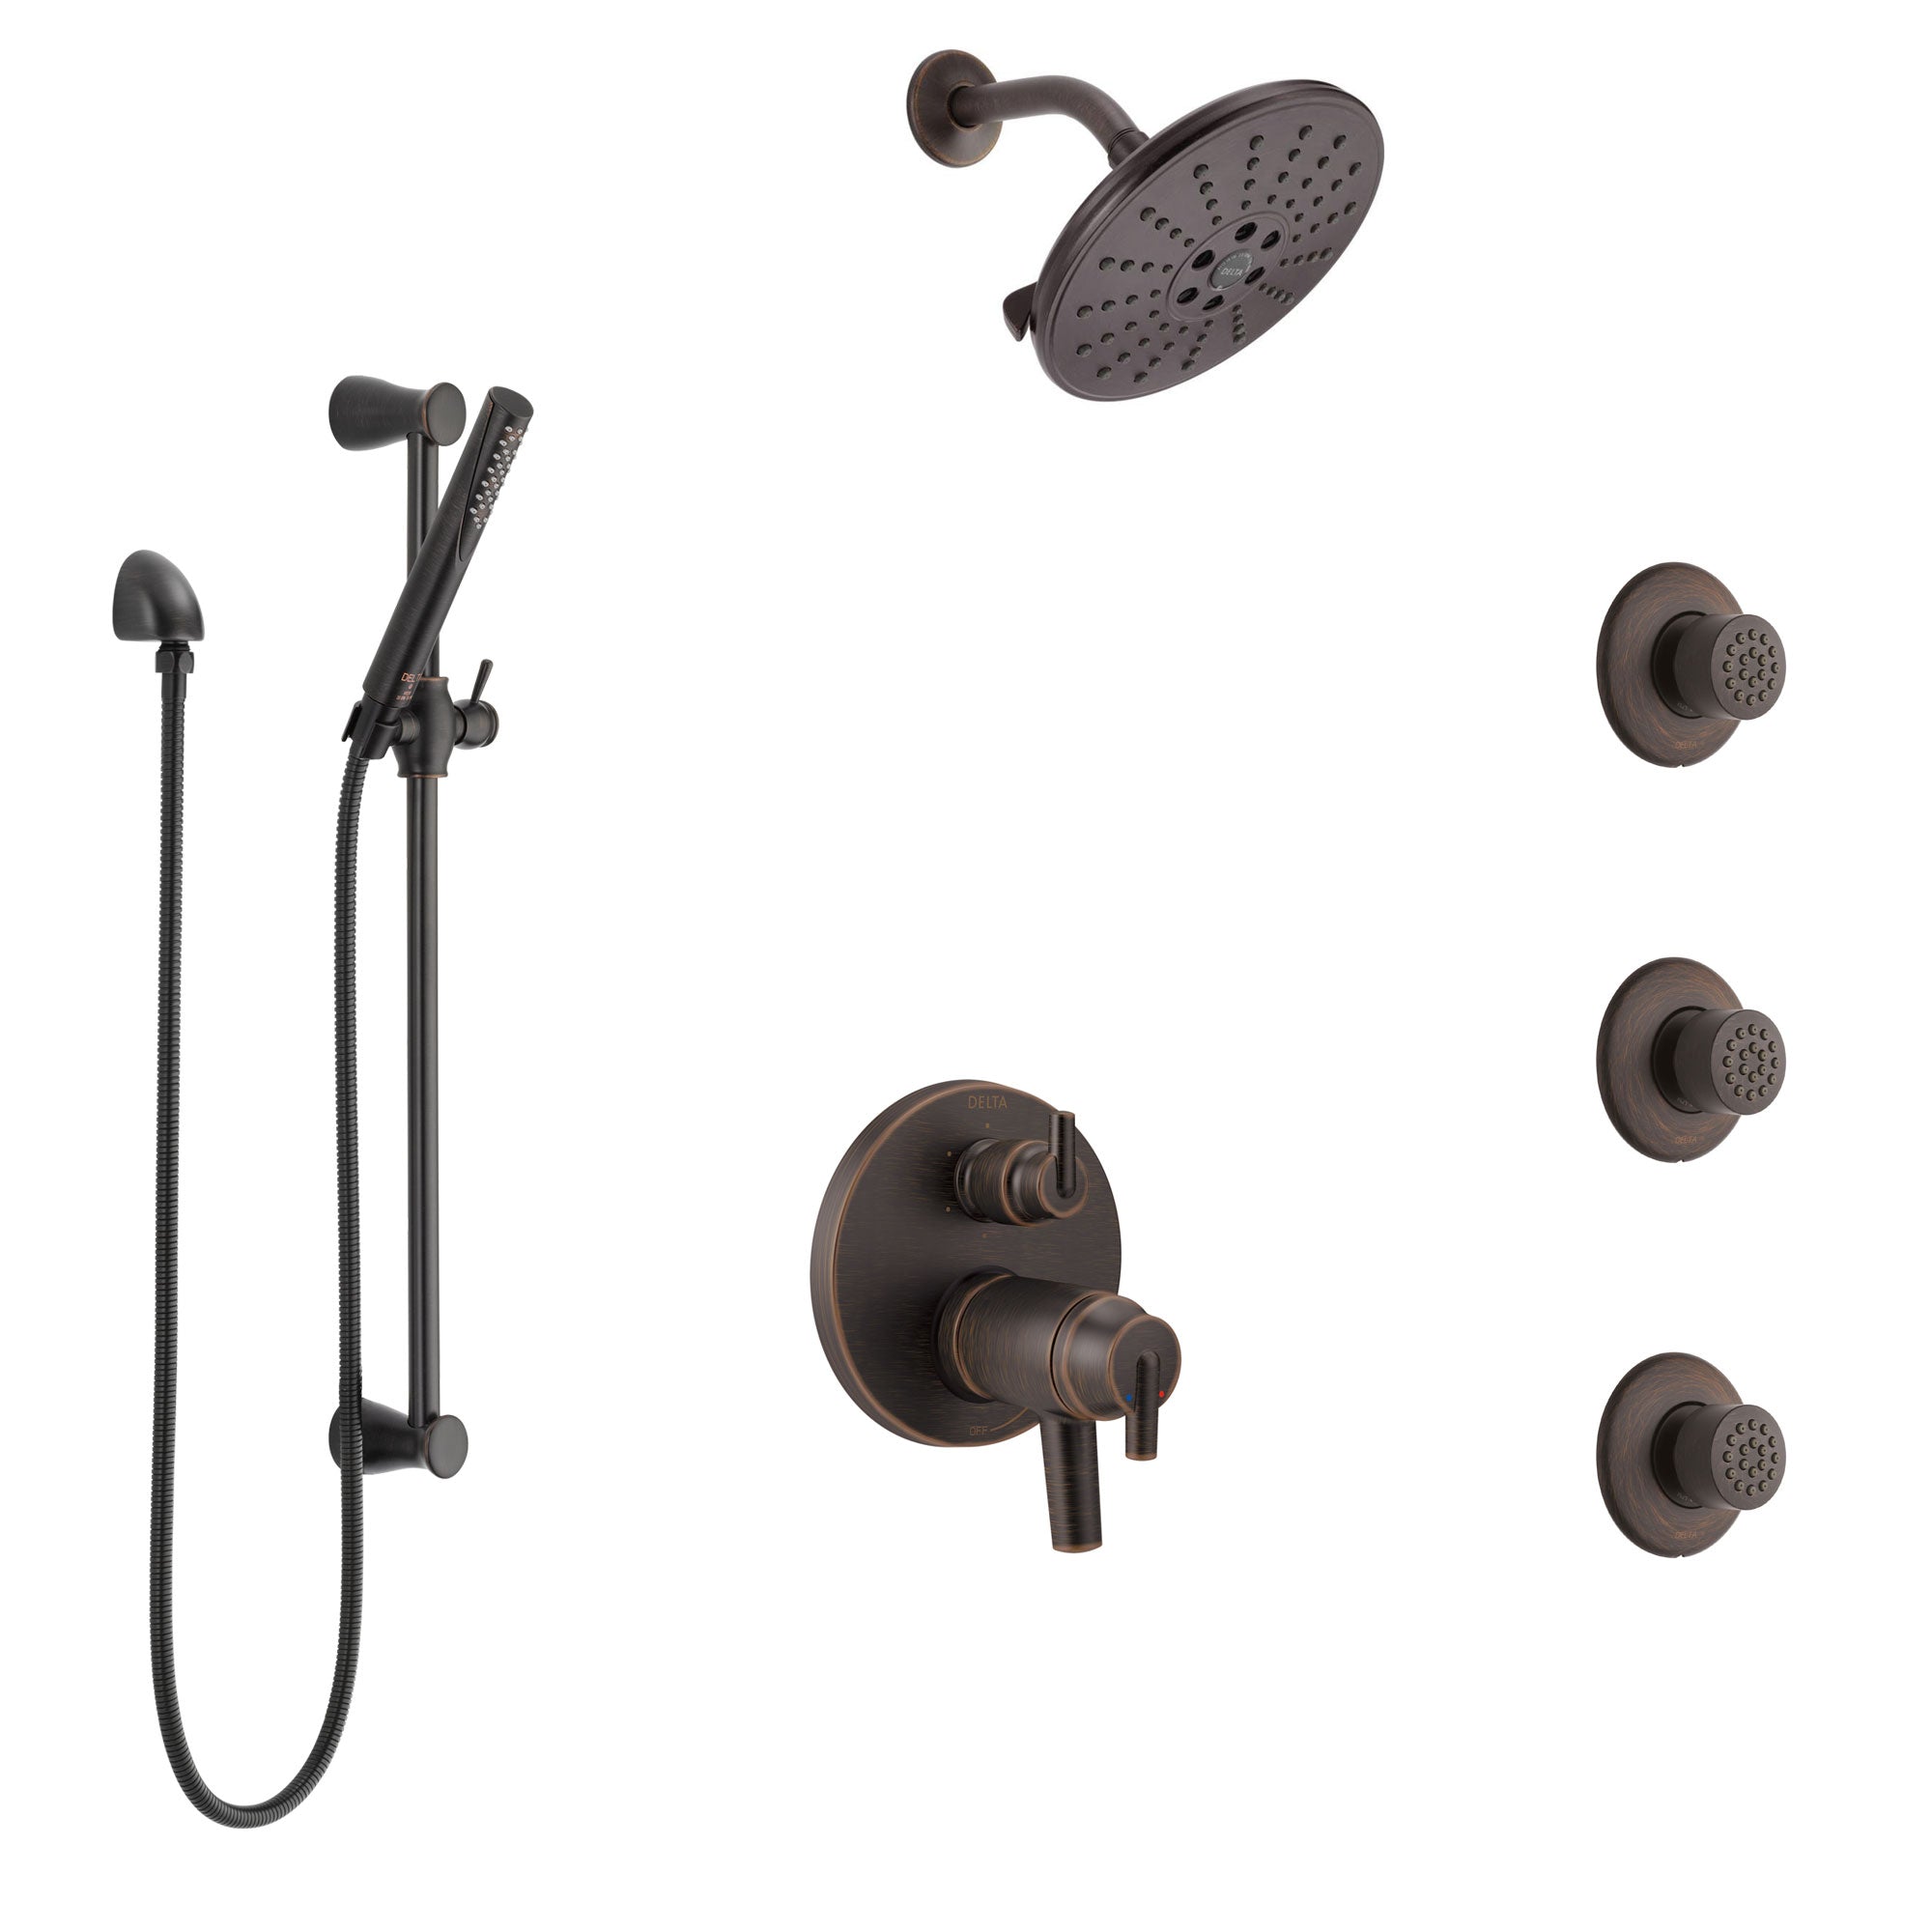 Delta Trinsic Venetian Bronze Dual Thermostatic Control Integrated Diverter Shower System, Showerhead, 3 Body Sprays, and Hand Shower SS27T959RB4